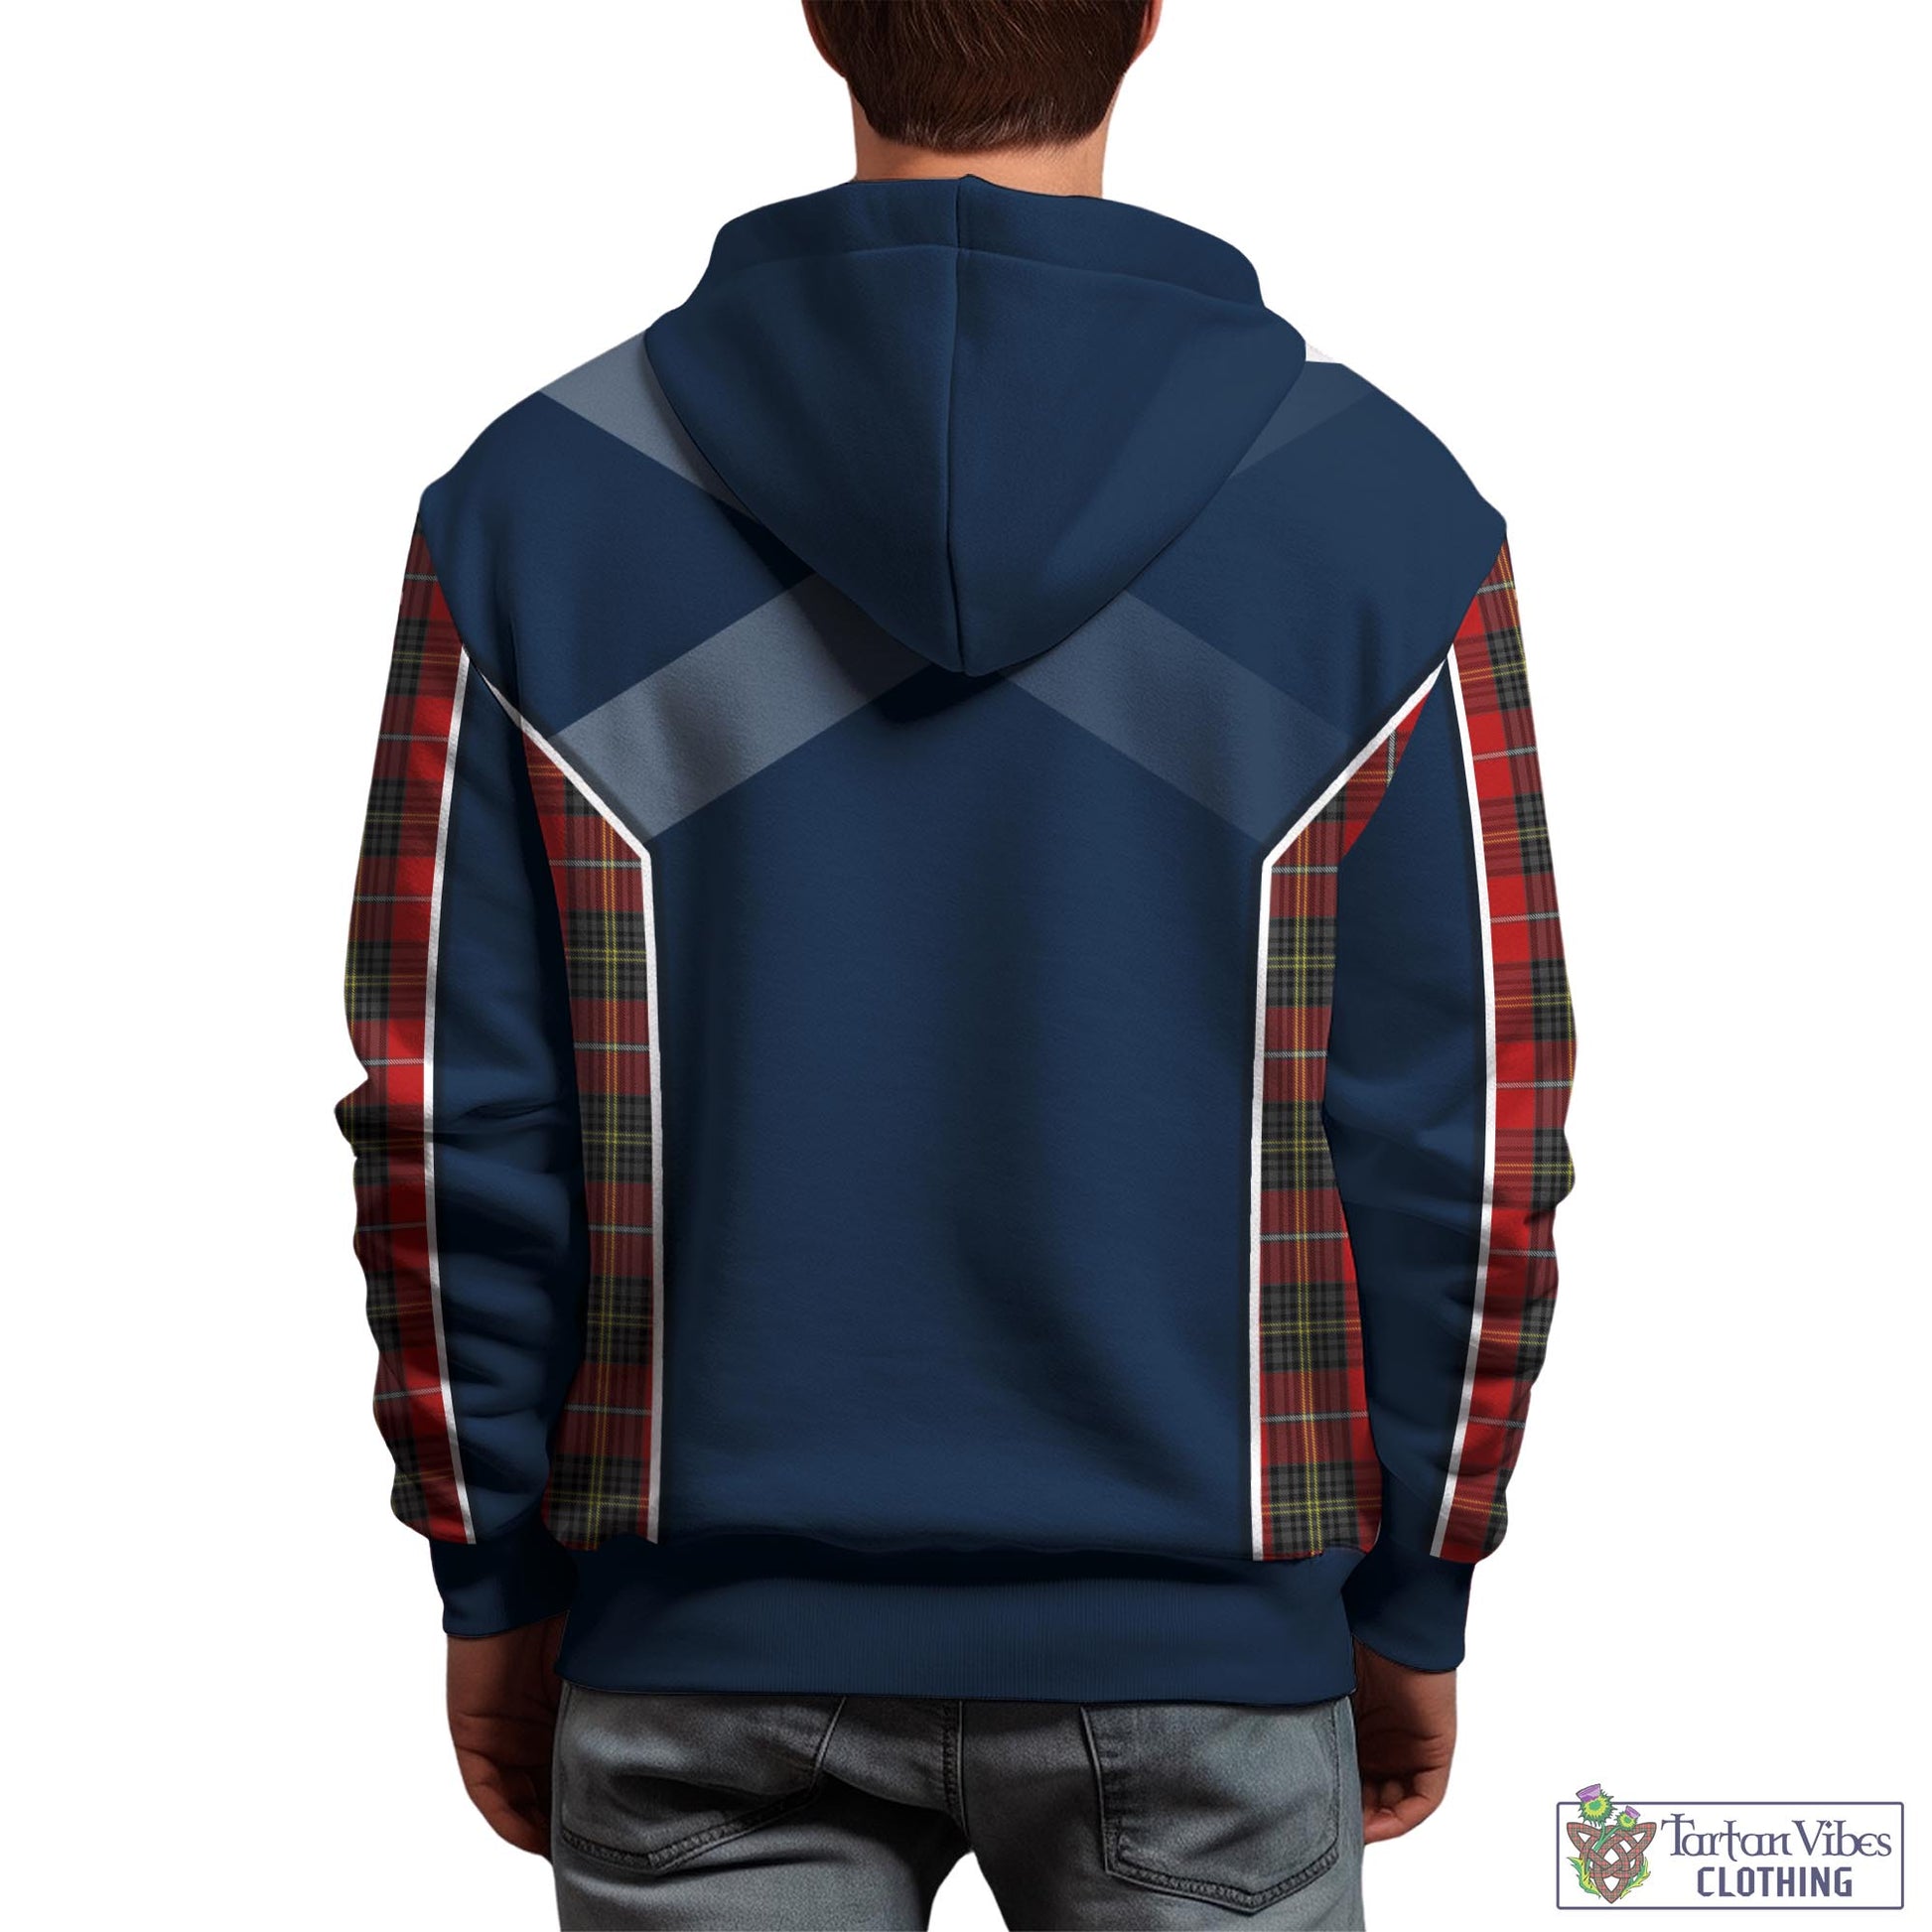 Tartan Vibes Clothing Orr Tartan Hoodie with Family Crest and Lion Rampant Vibes Sport Style